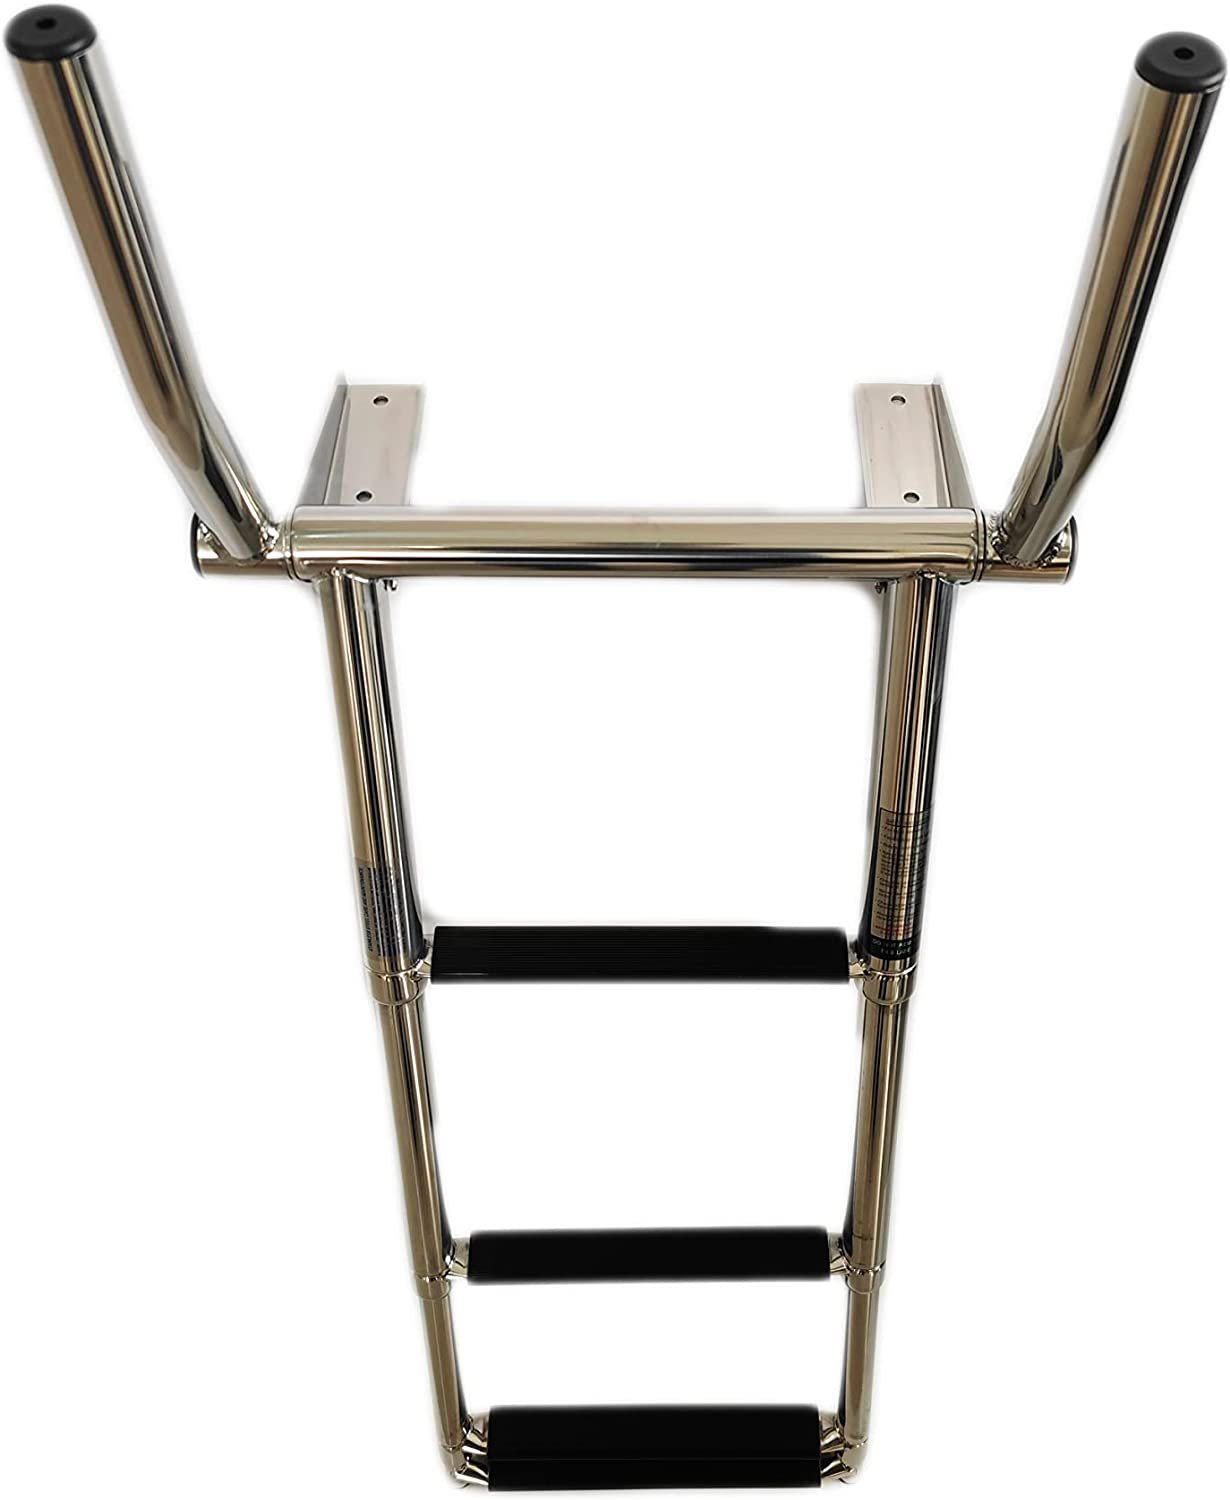 MARINE CITY 316 Grade Stainless Steel 4-Step Over Platform Telescoping Ladder with Retractable Handle